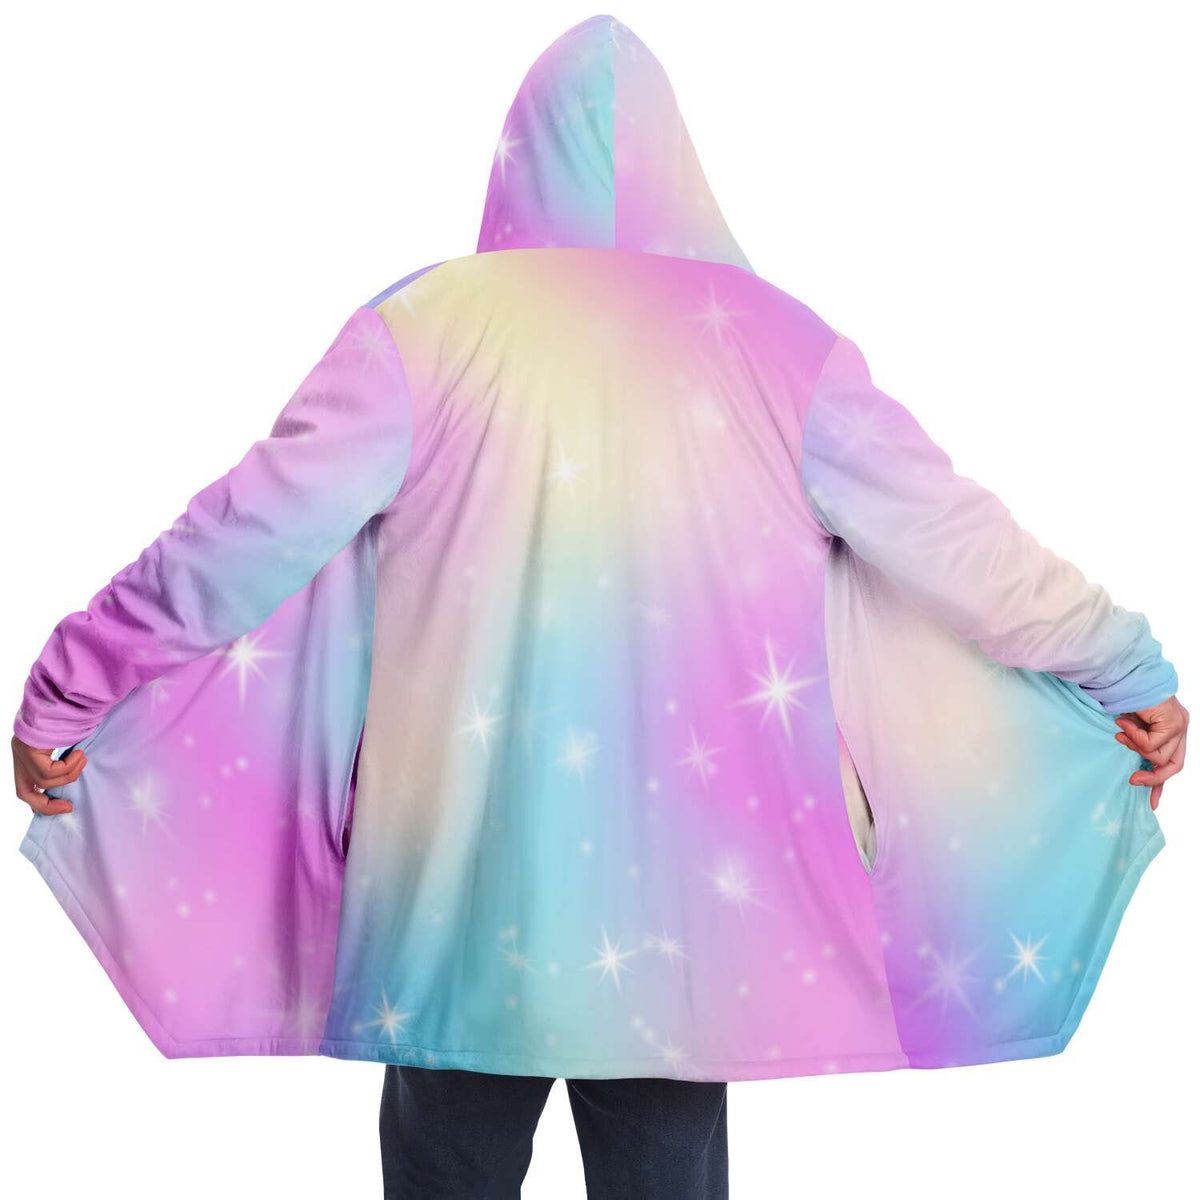 Pastel Rainbow Bright Colors Cloak with Hood and Pockets Micro Mink Lined Jacket